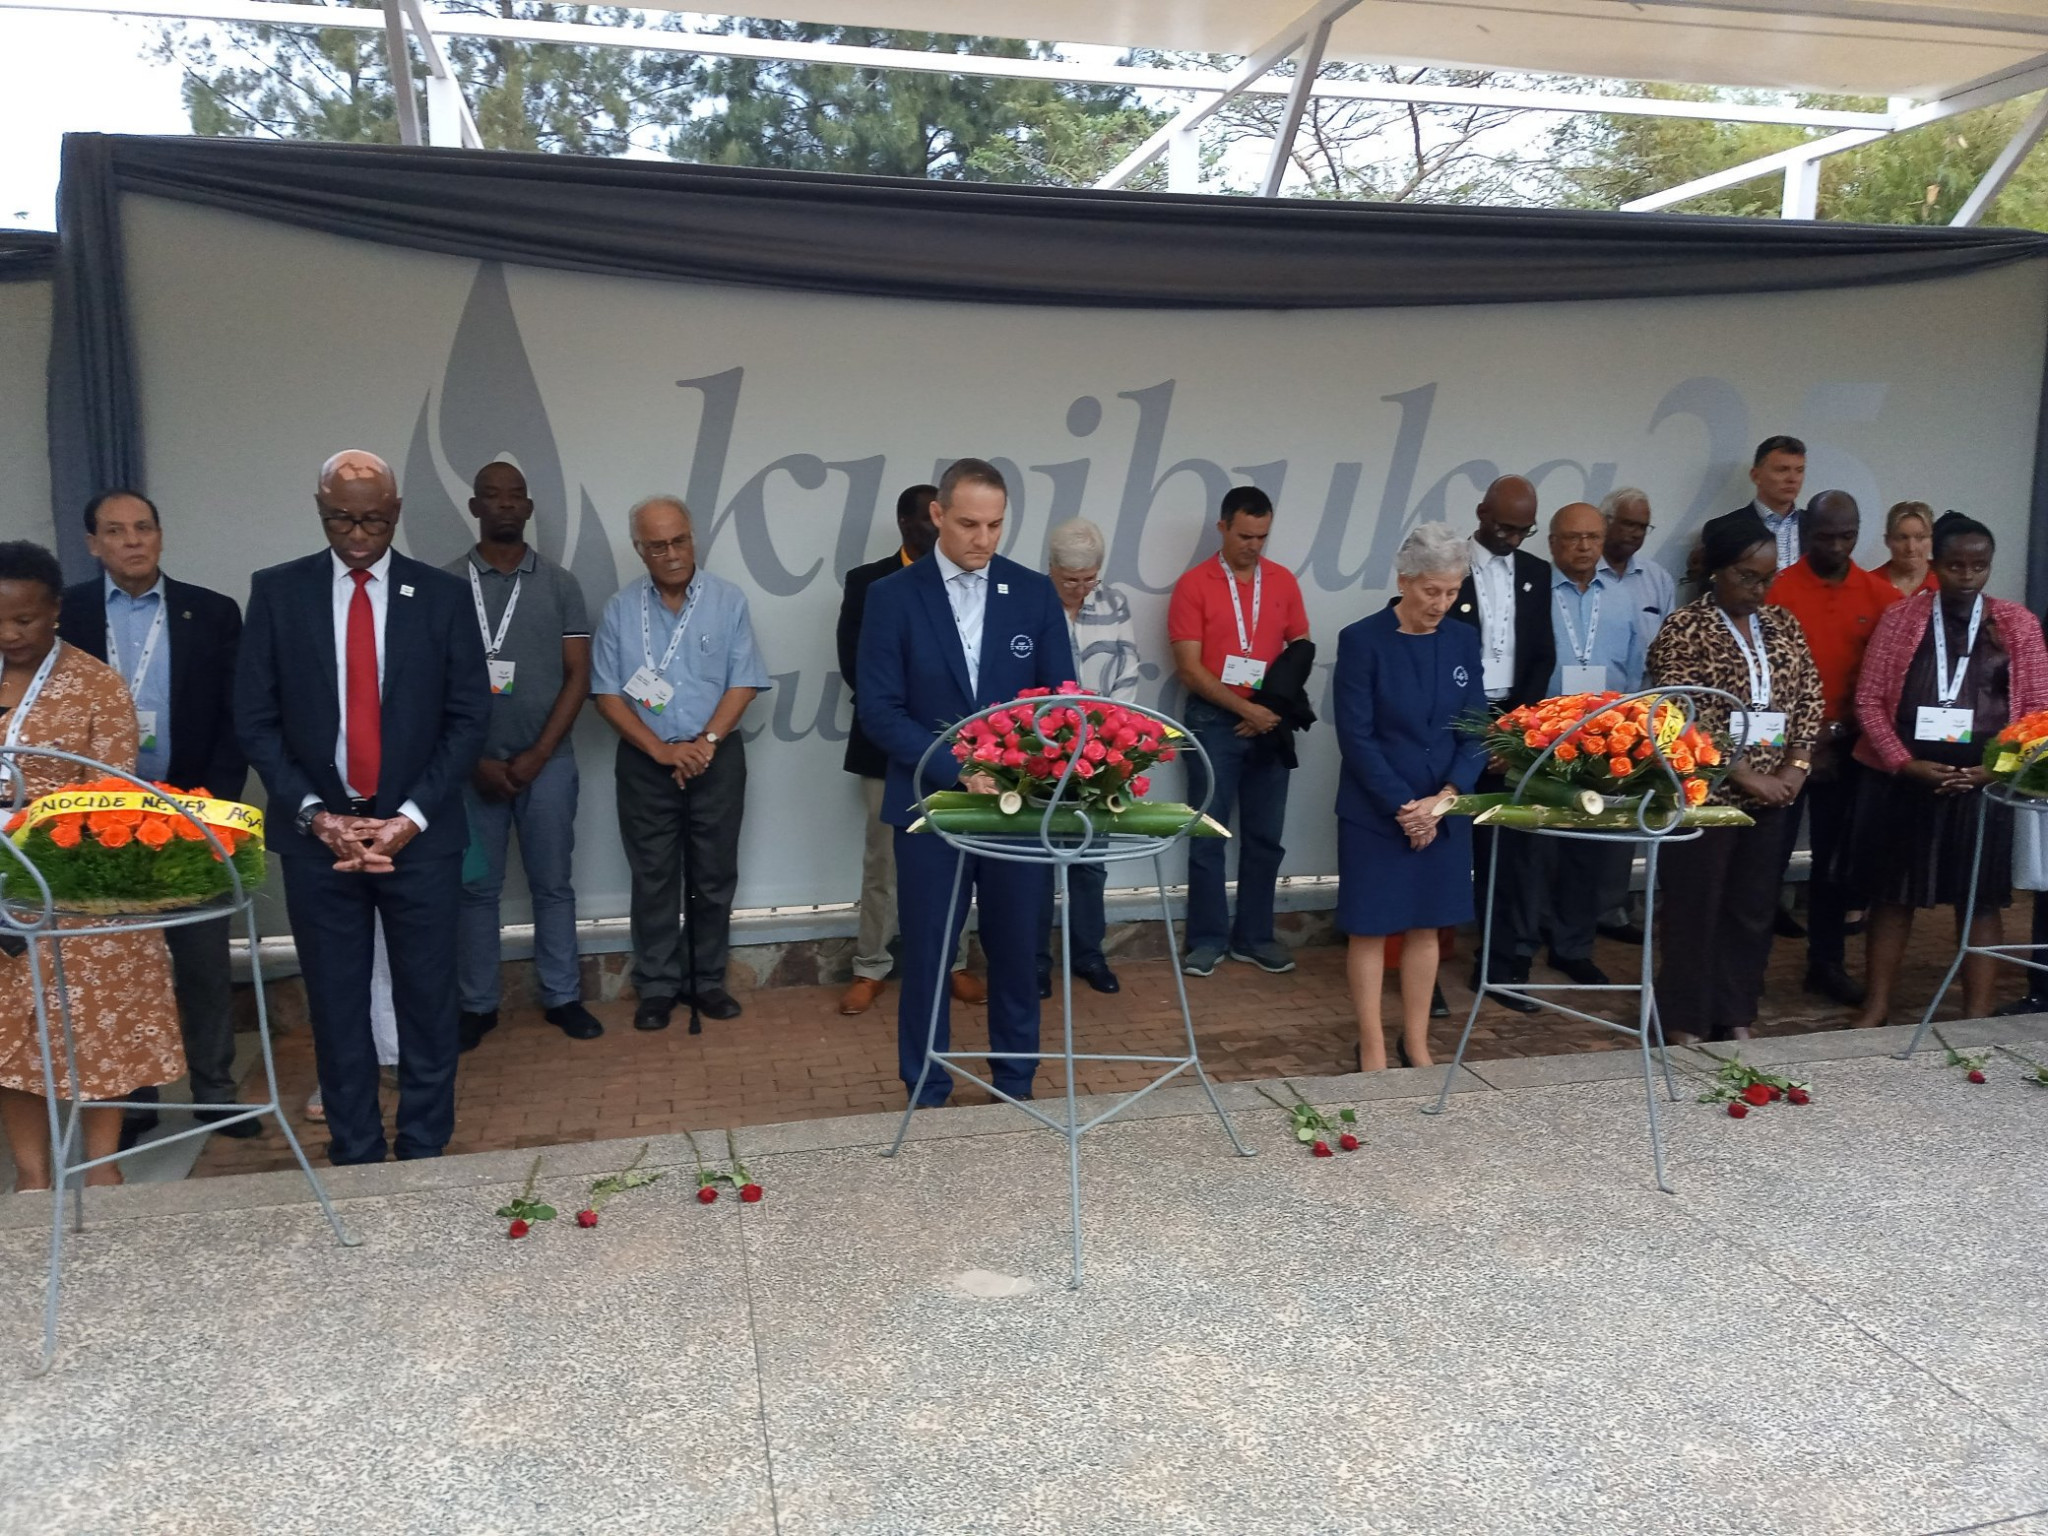 Dame Louise Martin laid a wreath at the Kigali Genocide Memorial to mark the 25th anniversary of the Rwanda genocide ©Rwanda CGA